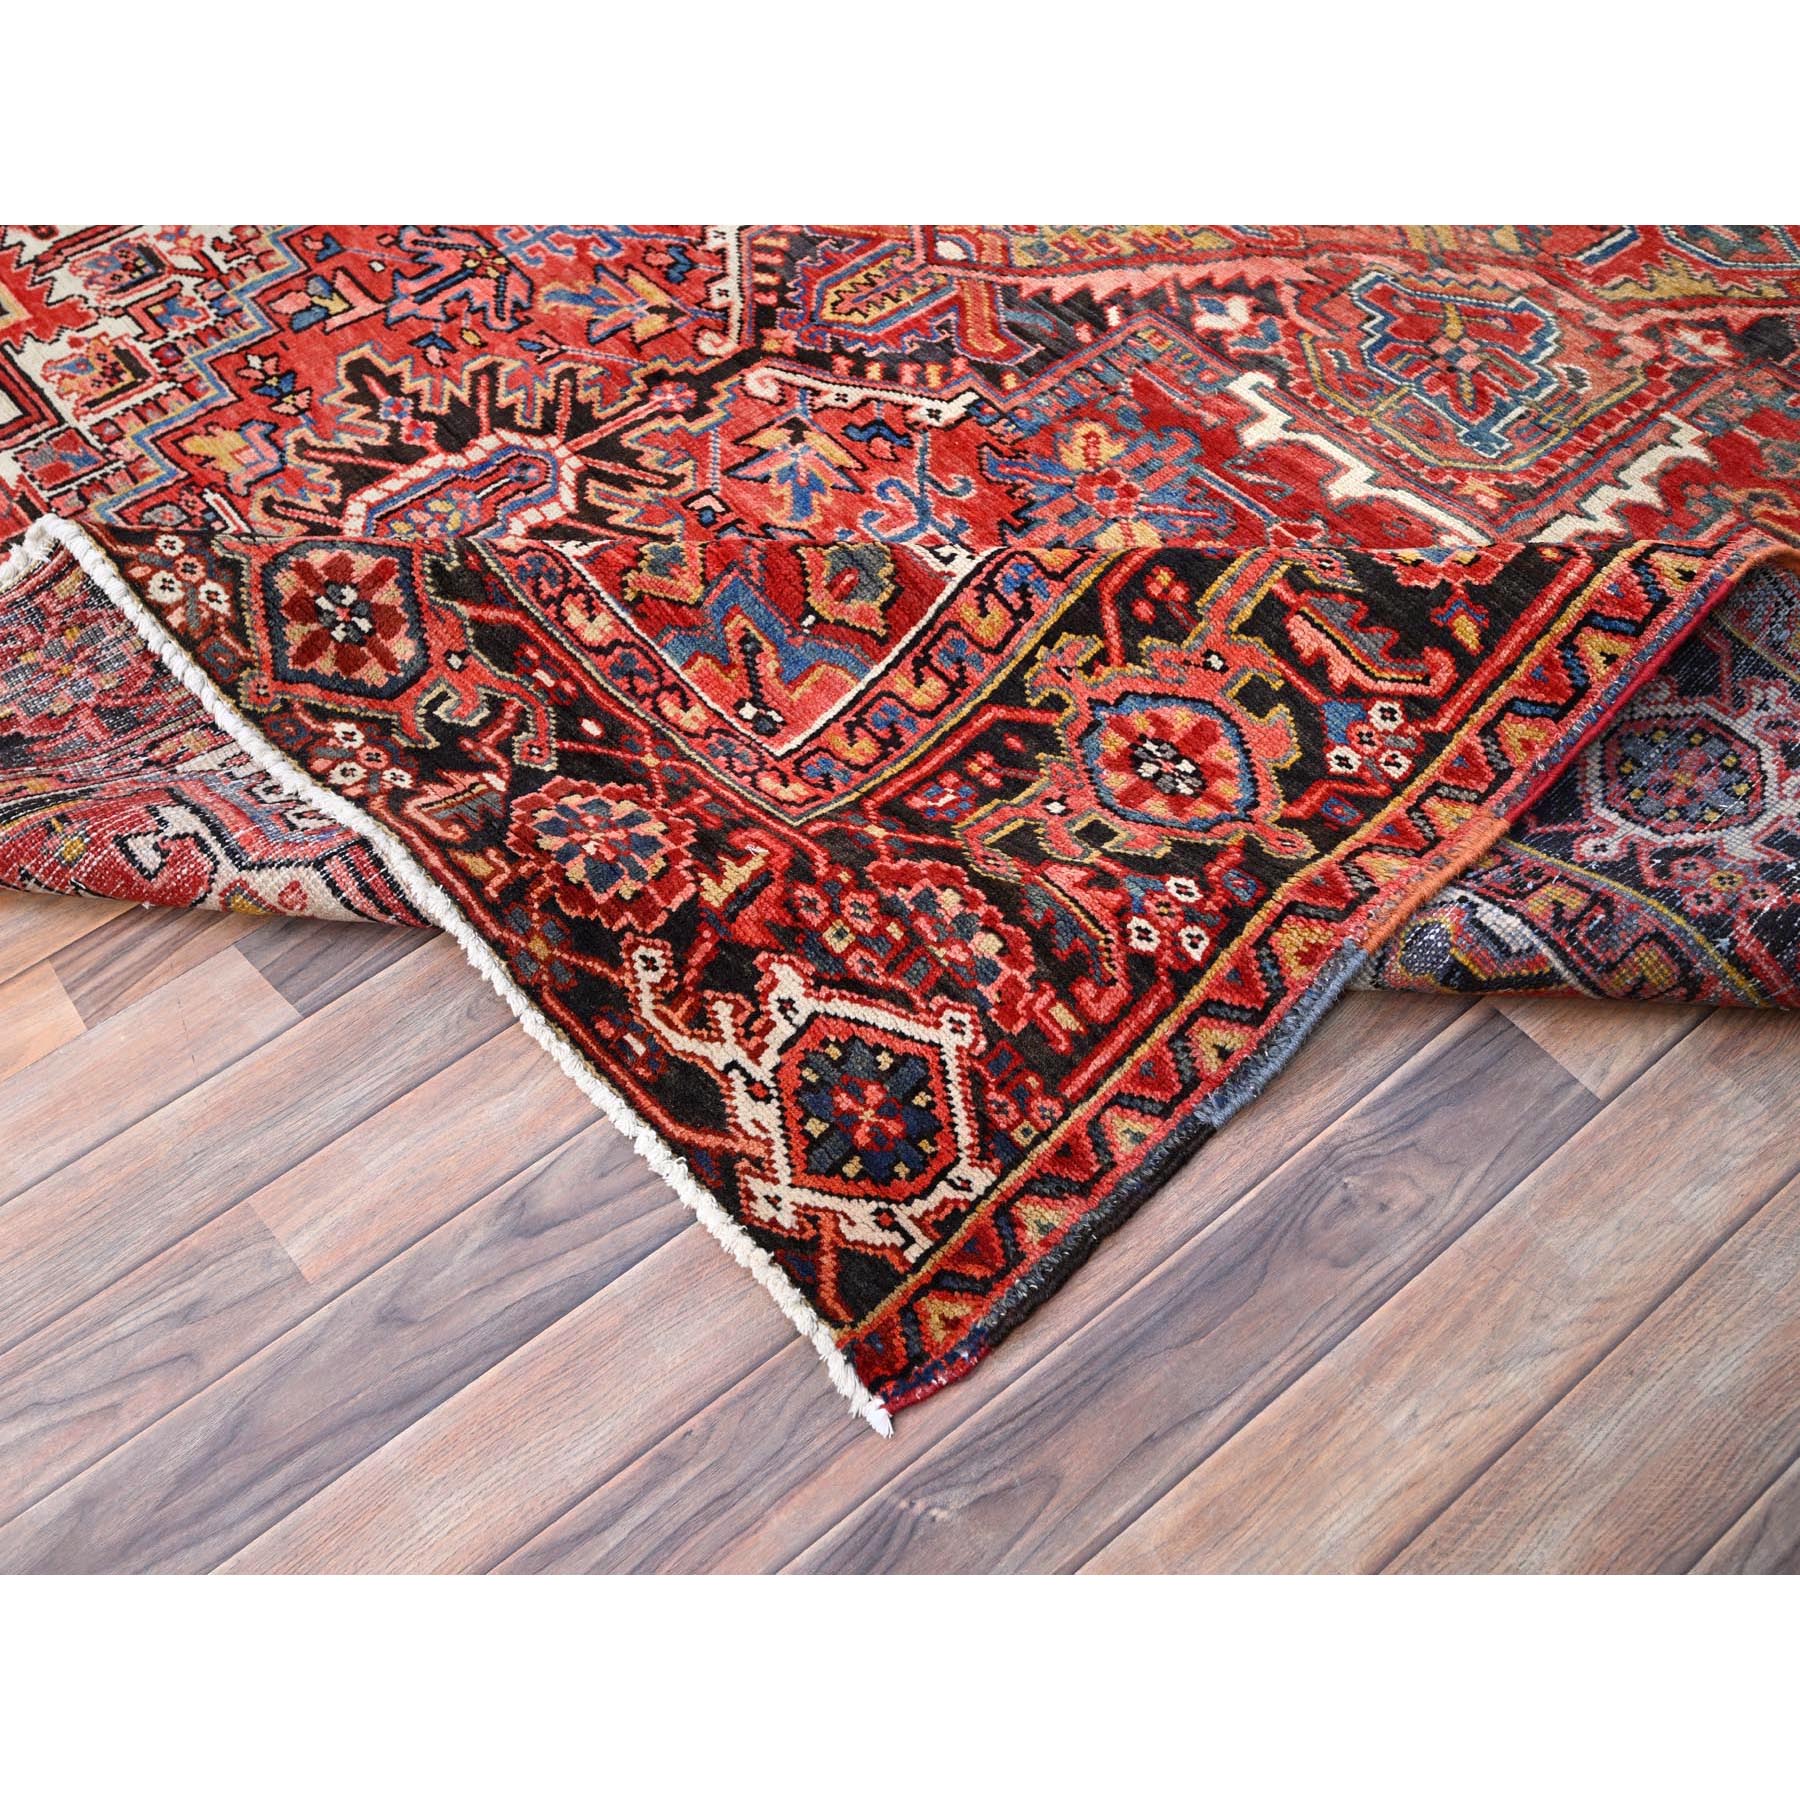 8'5"x11'8" Imperial Red, Semi Antique Persian Heriz, Good Condition, Rustic Feel, Worn Wool, Hand Woven, Oriental Rug 